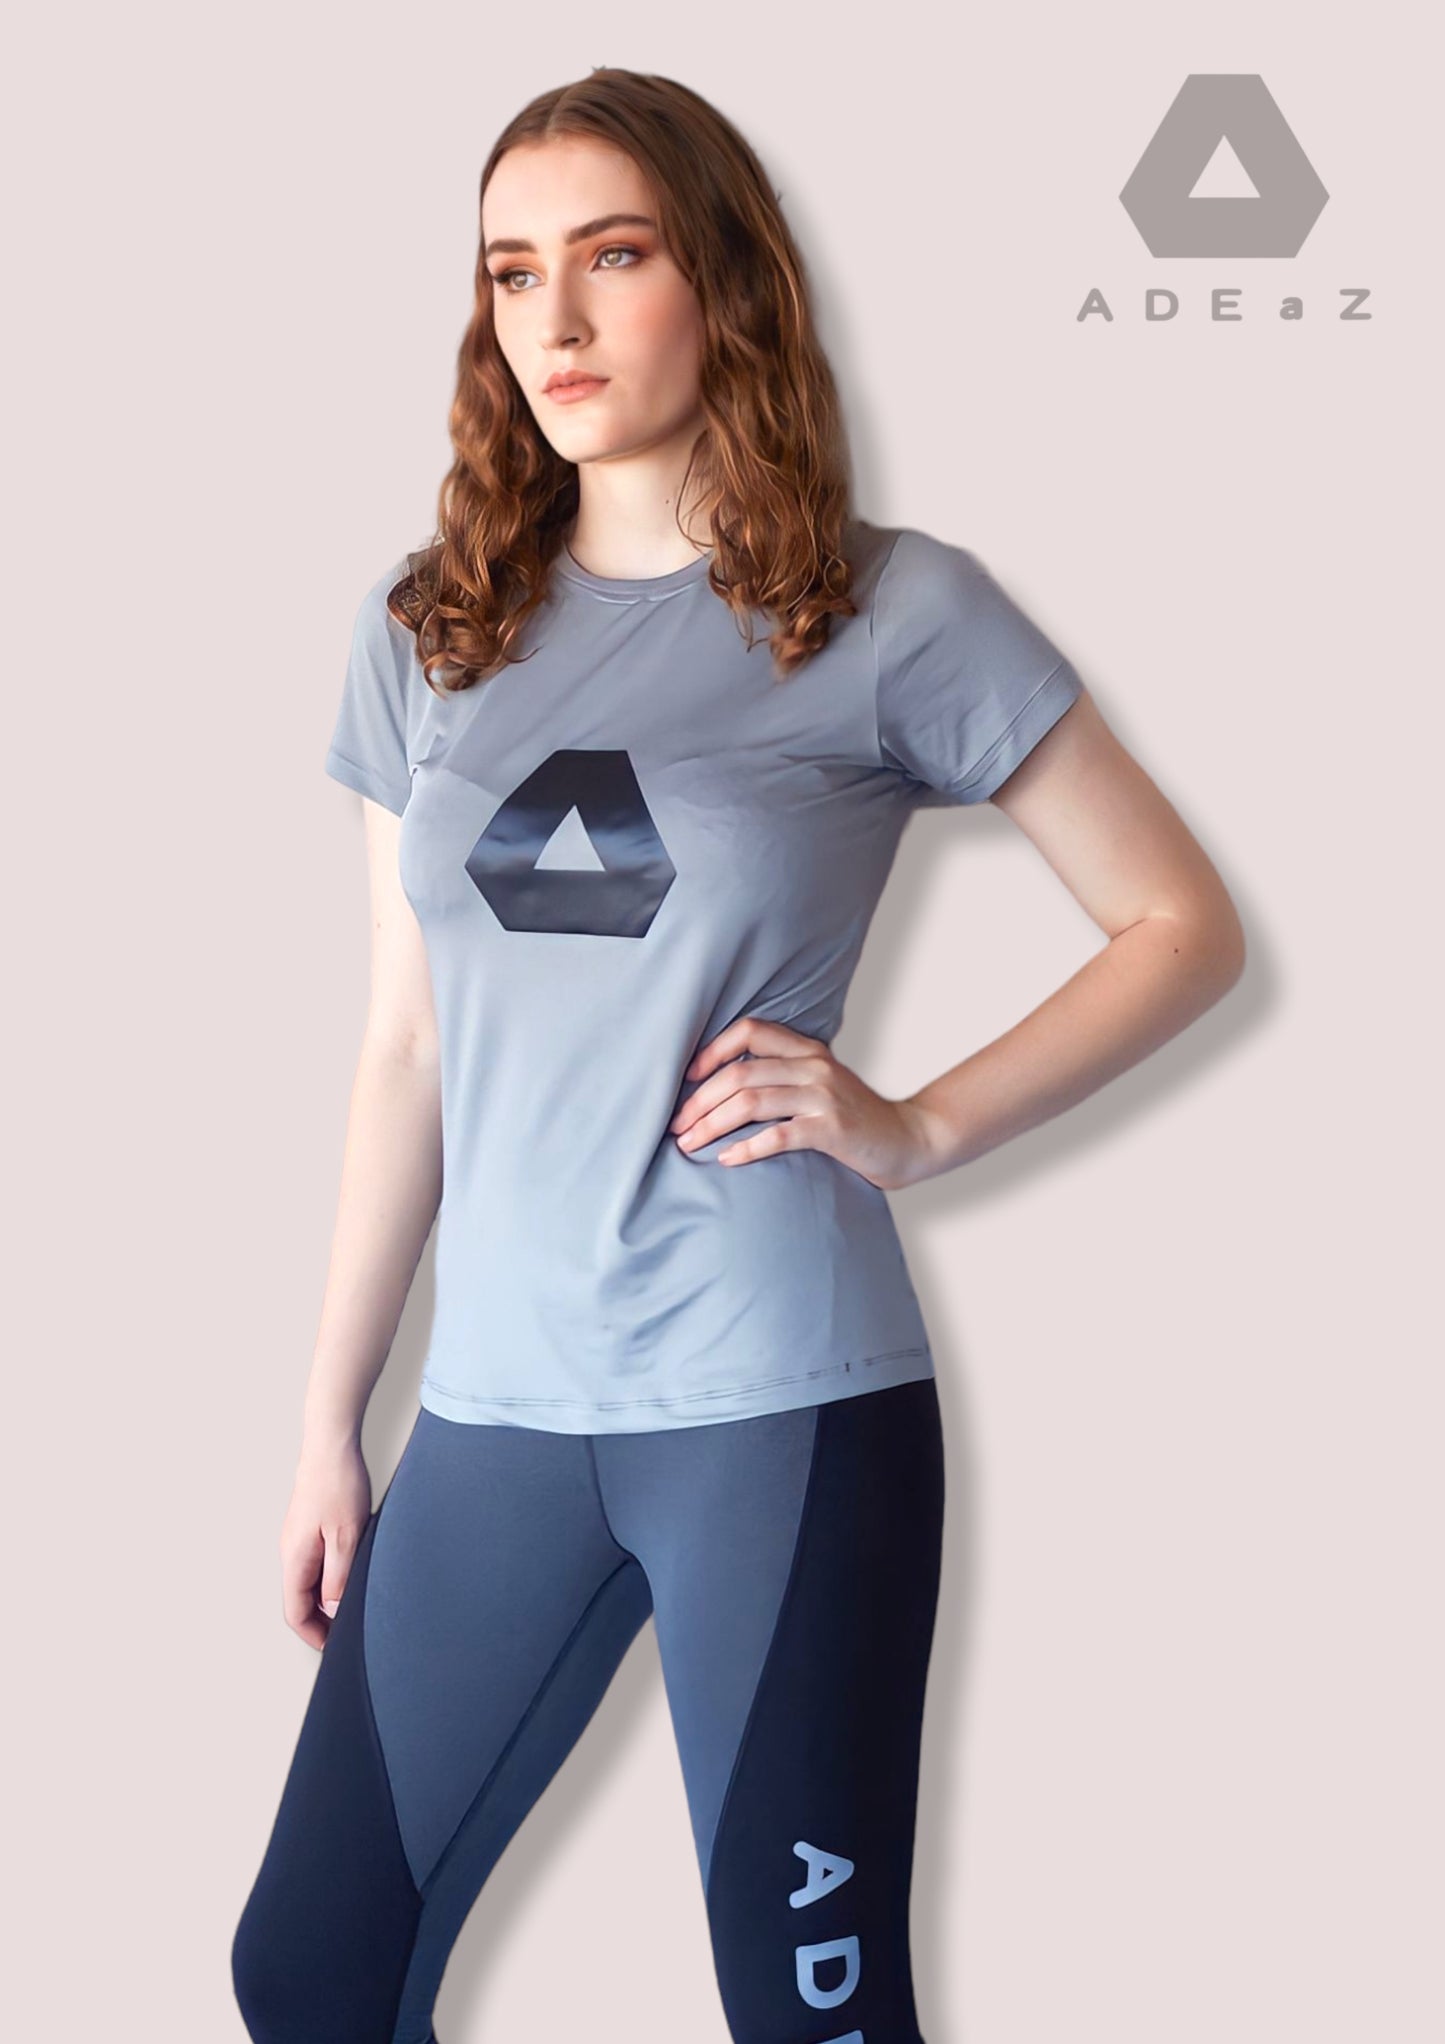 Women's Crew Neck T-Shirt: Classic and versatile tee with a comfortable crew neckline for women.